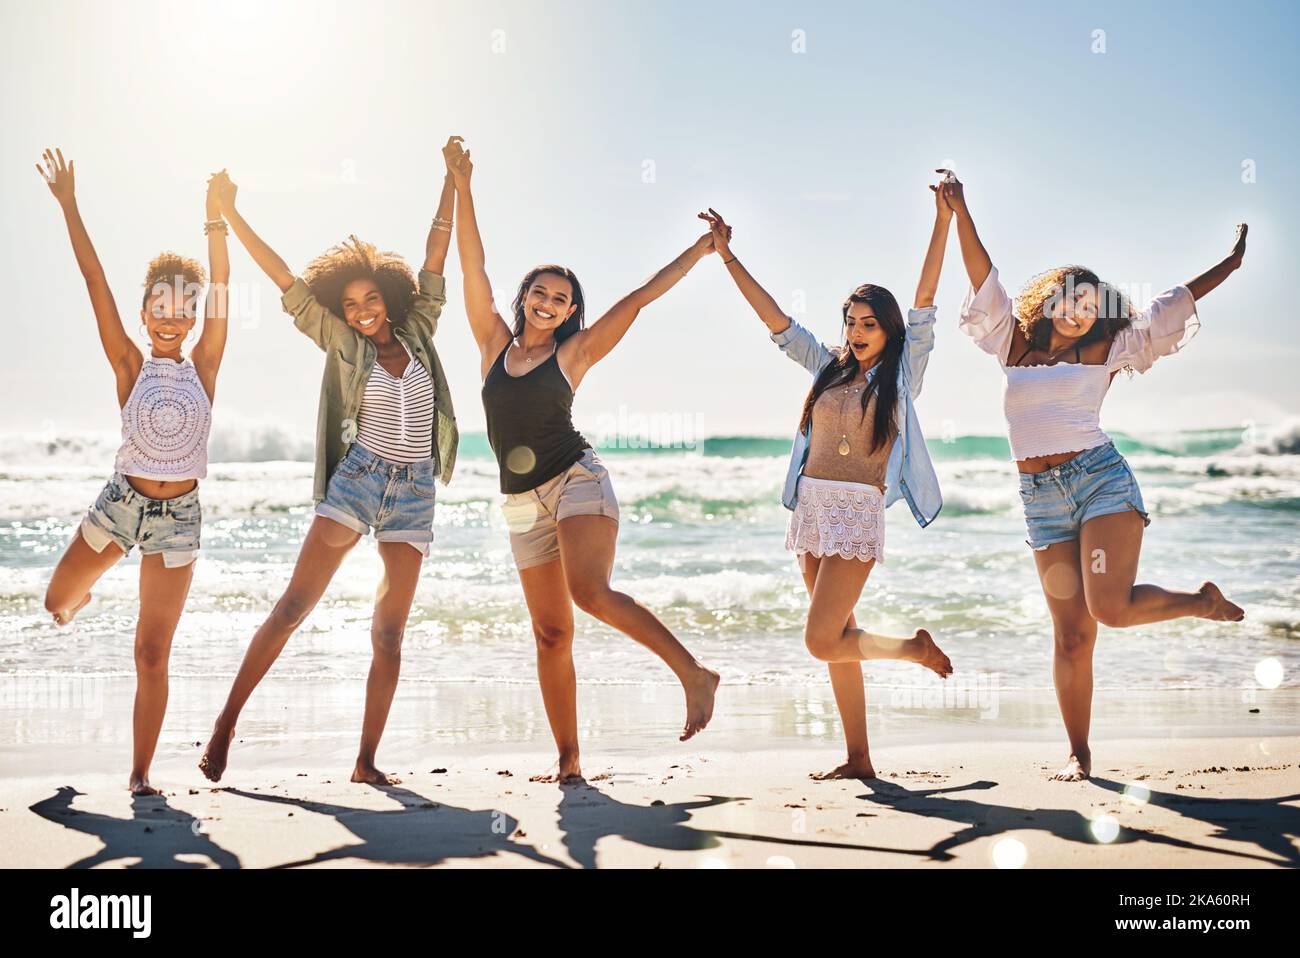 They have an unbreakable bond. a group of cheerful friends holding hands on the beach. Stock Photo